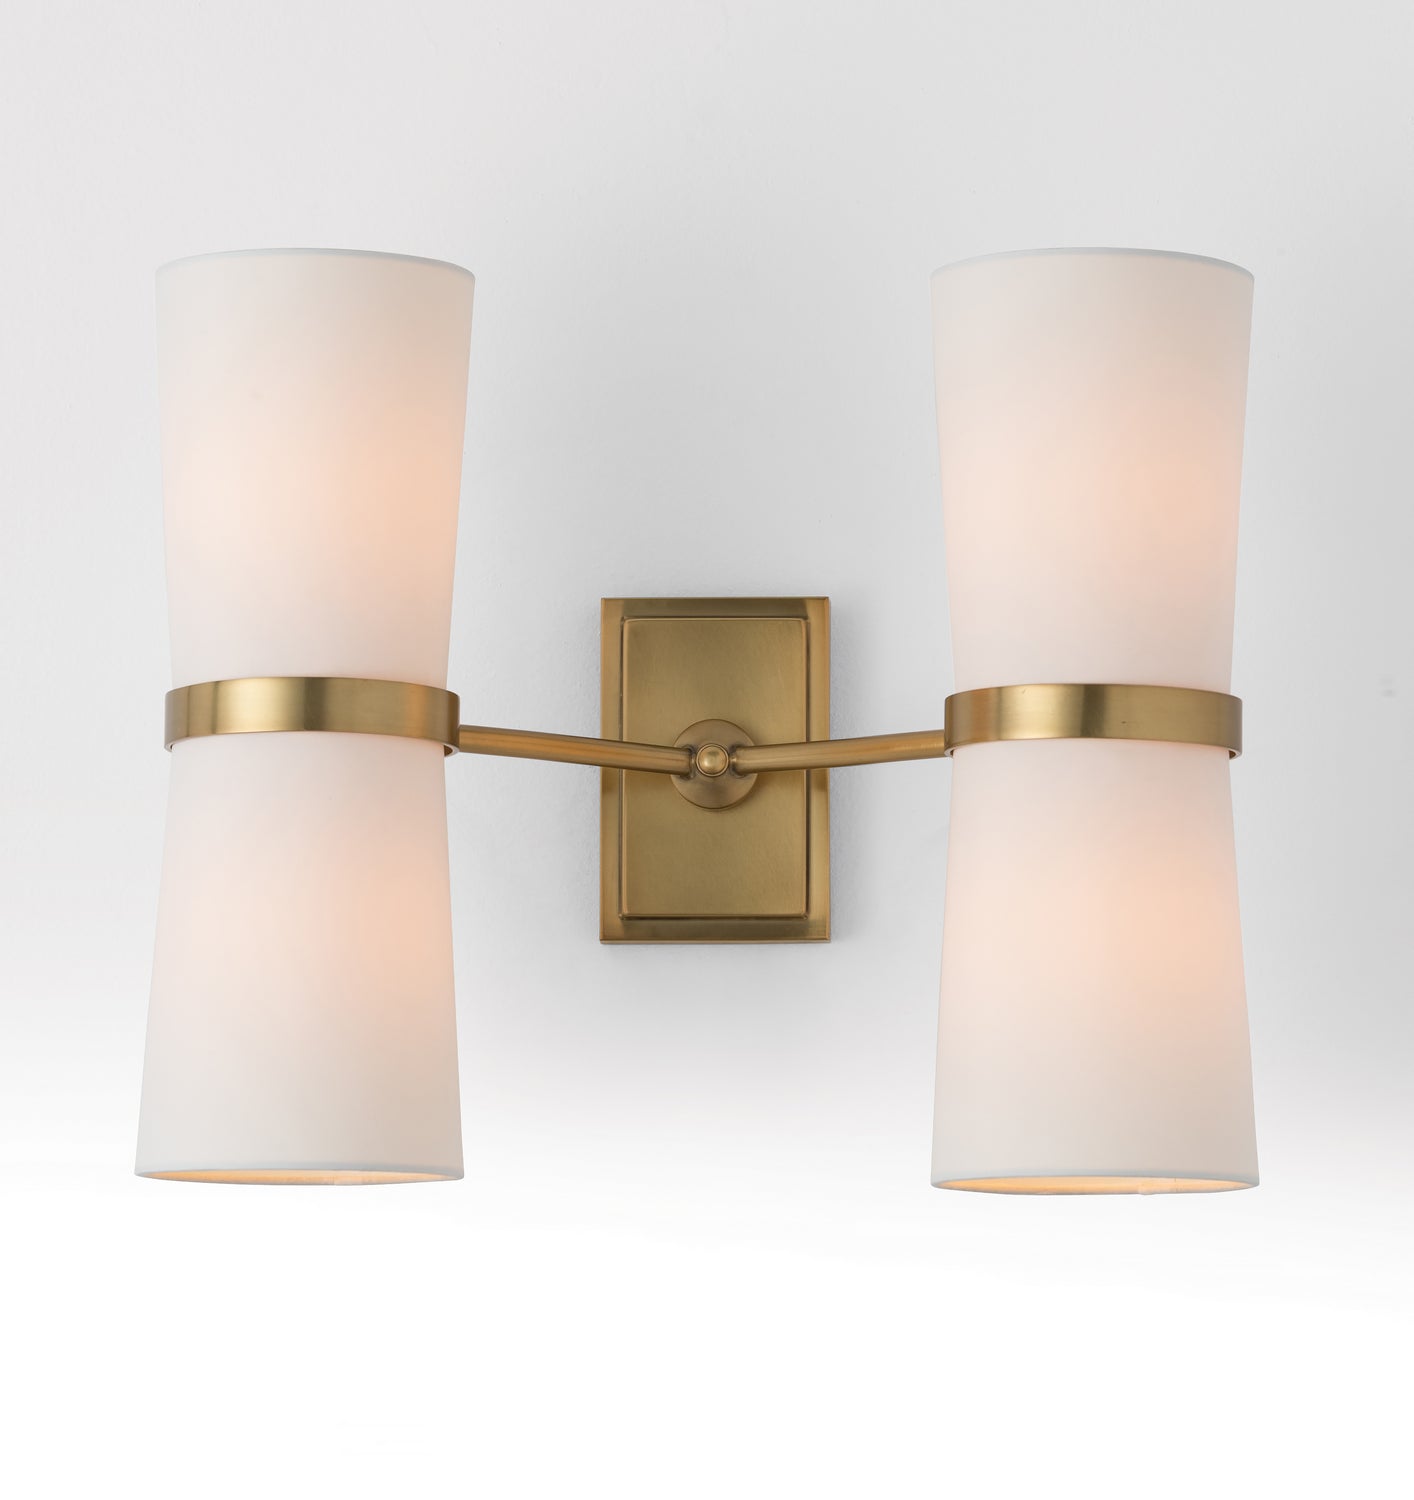 Four Light Wall Sconce from the Inwood collection in Antique Brass finish